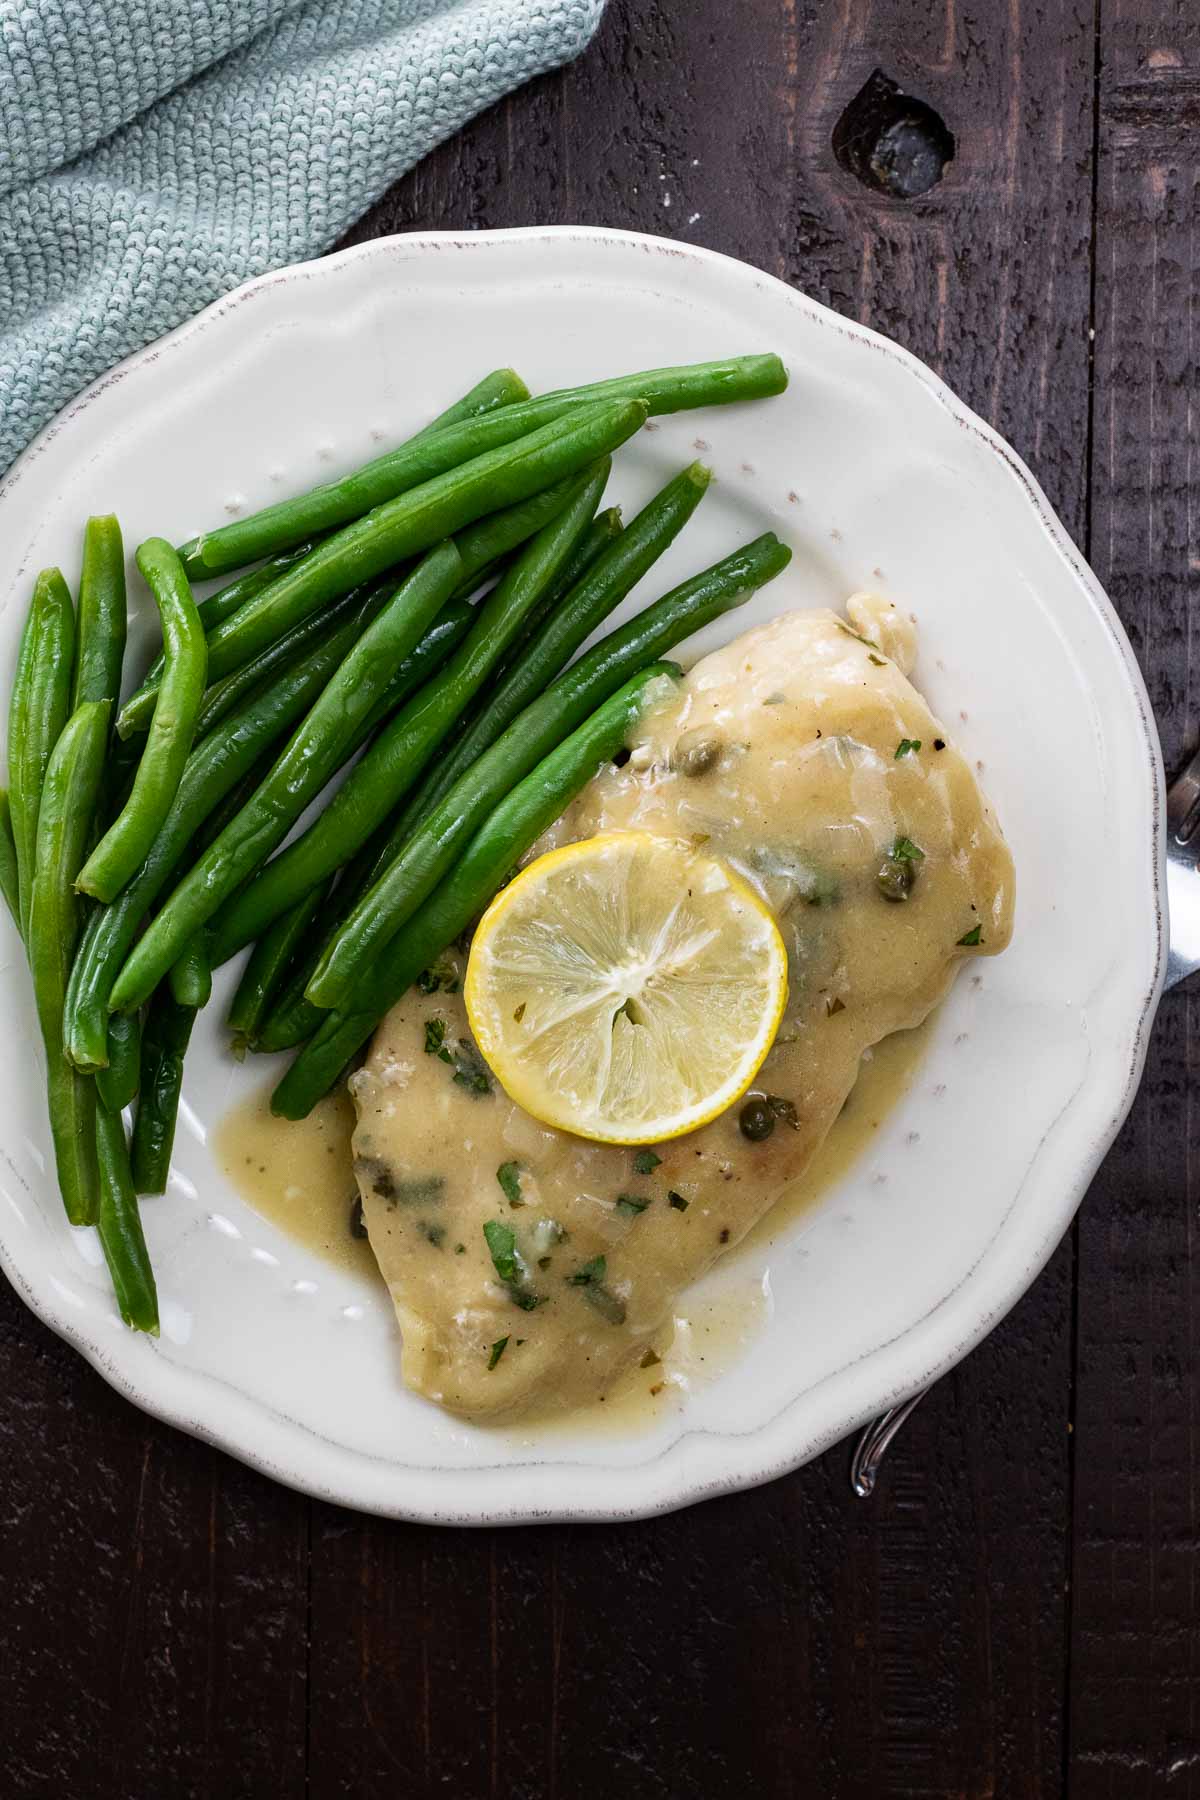 extra saucy chicken piccata on a plate with green beans and a lemon slice